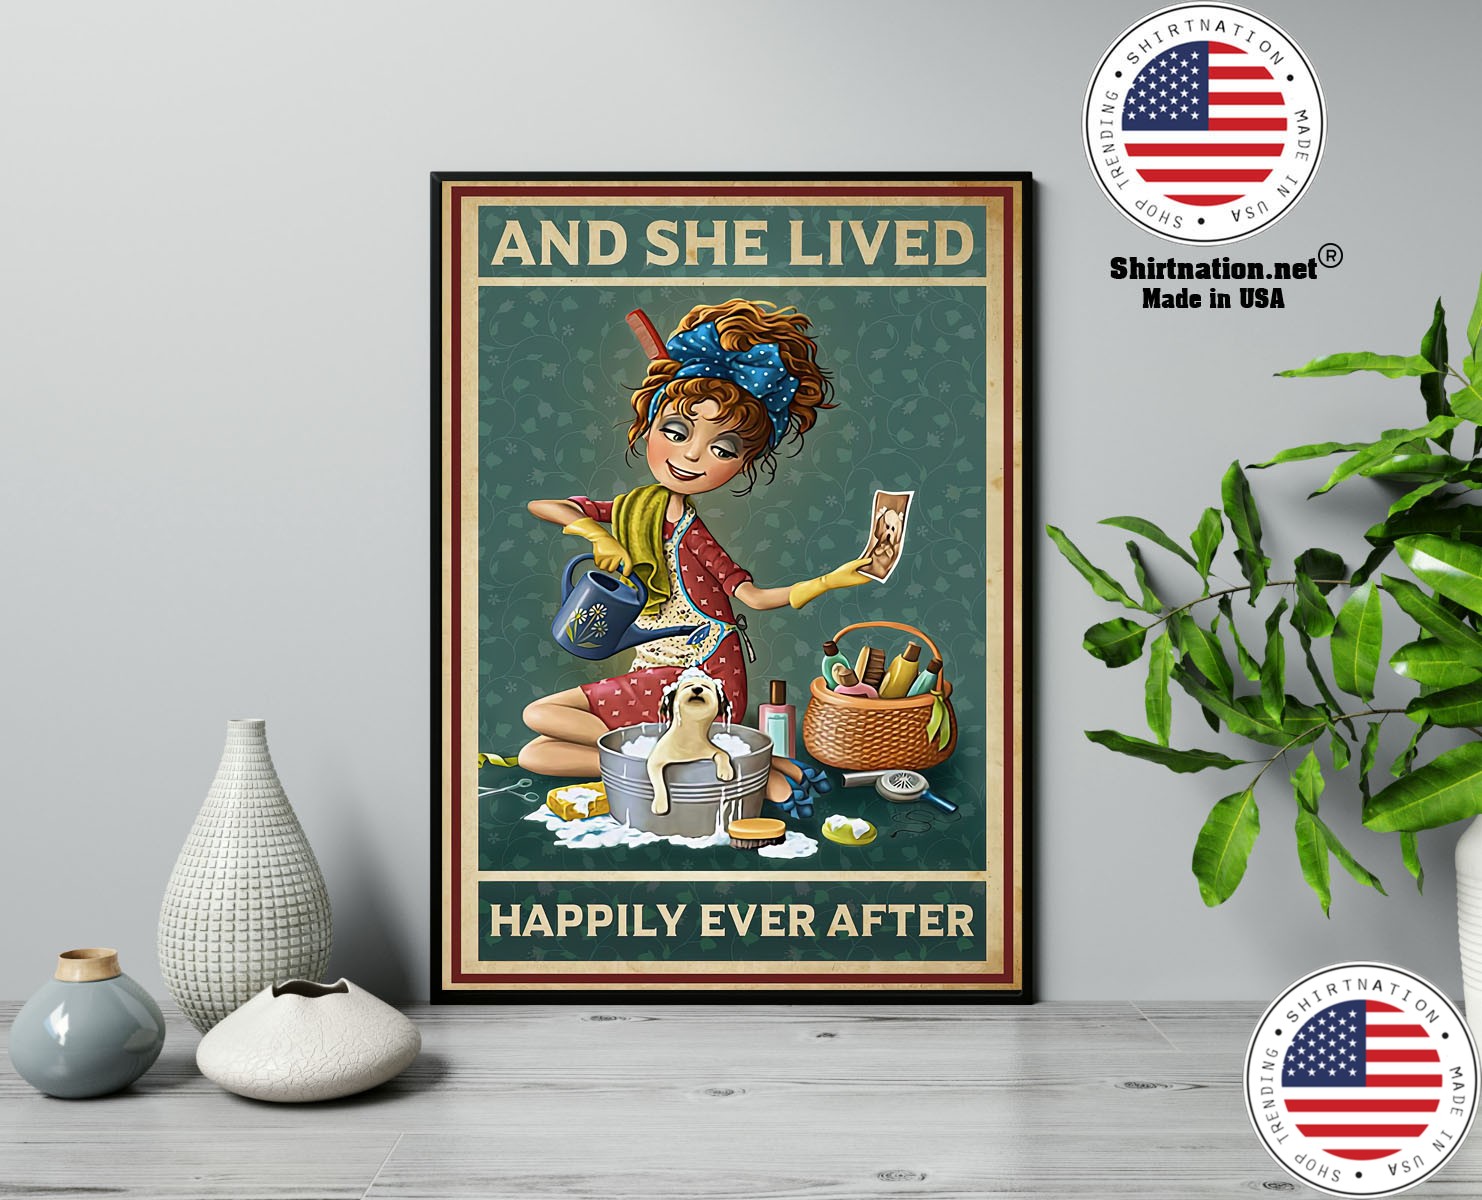 Grooming And she lived happily ever after poster 13